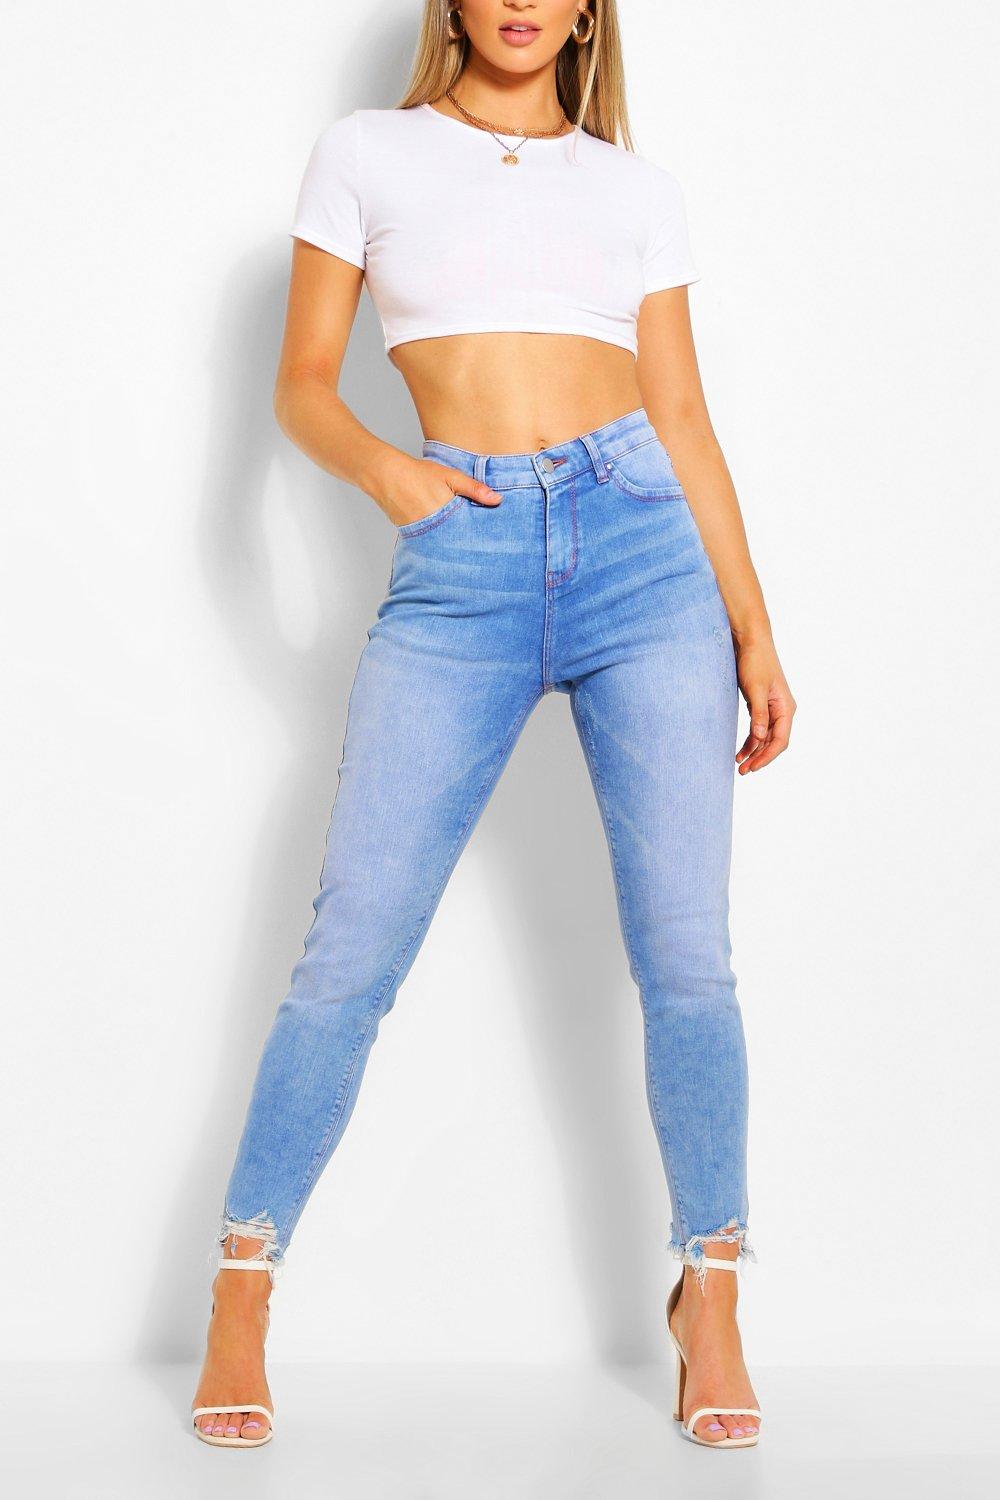 bright blue high waisted skinny jeans